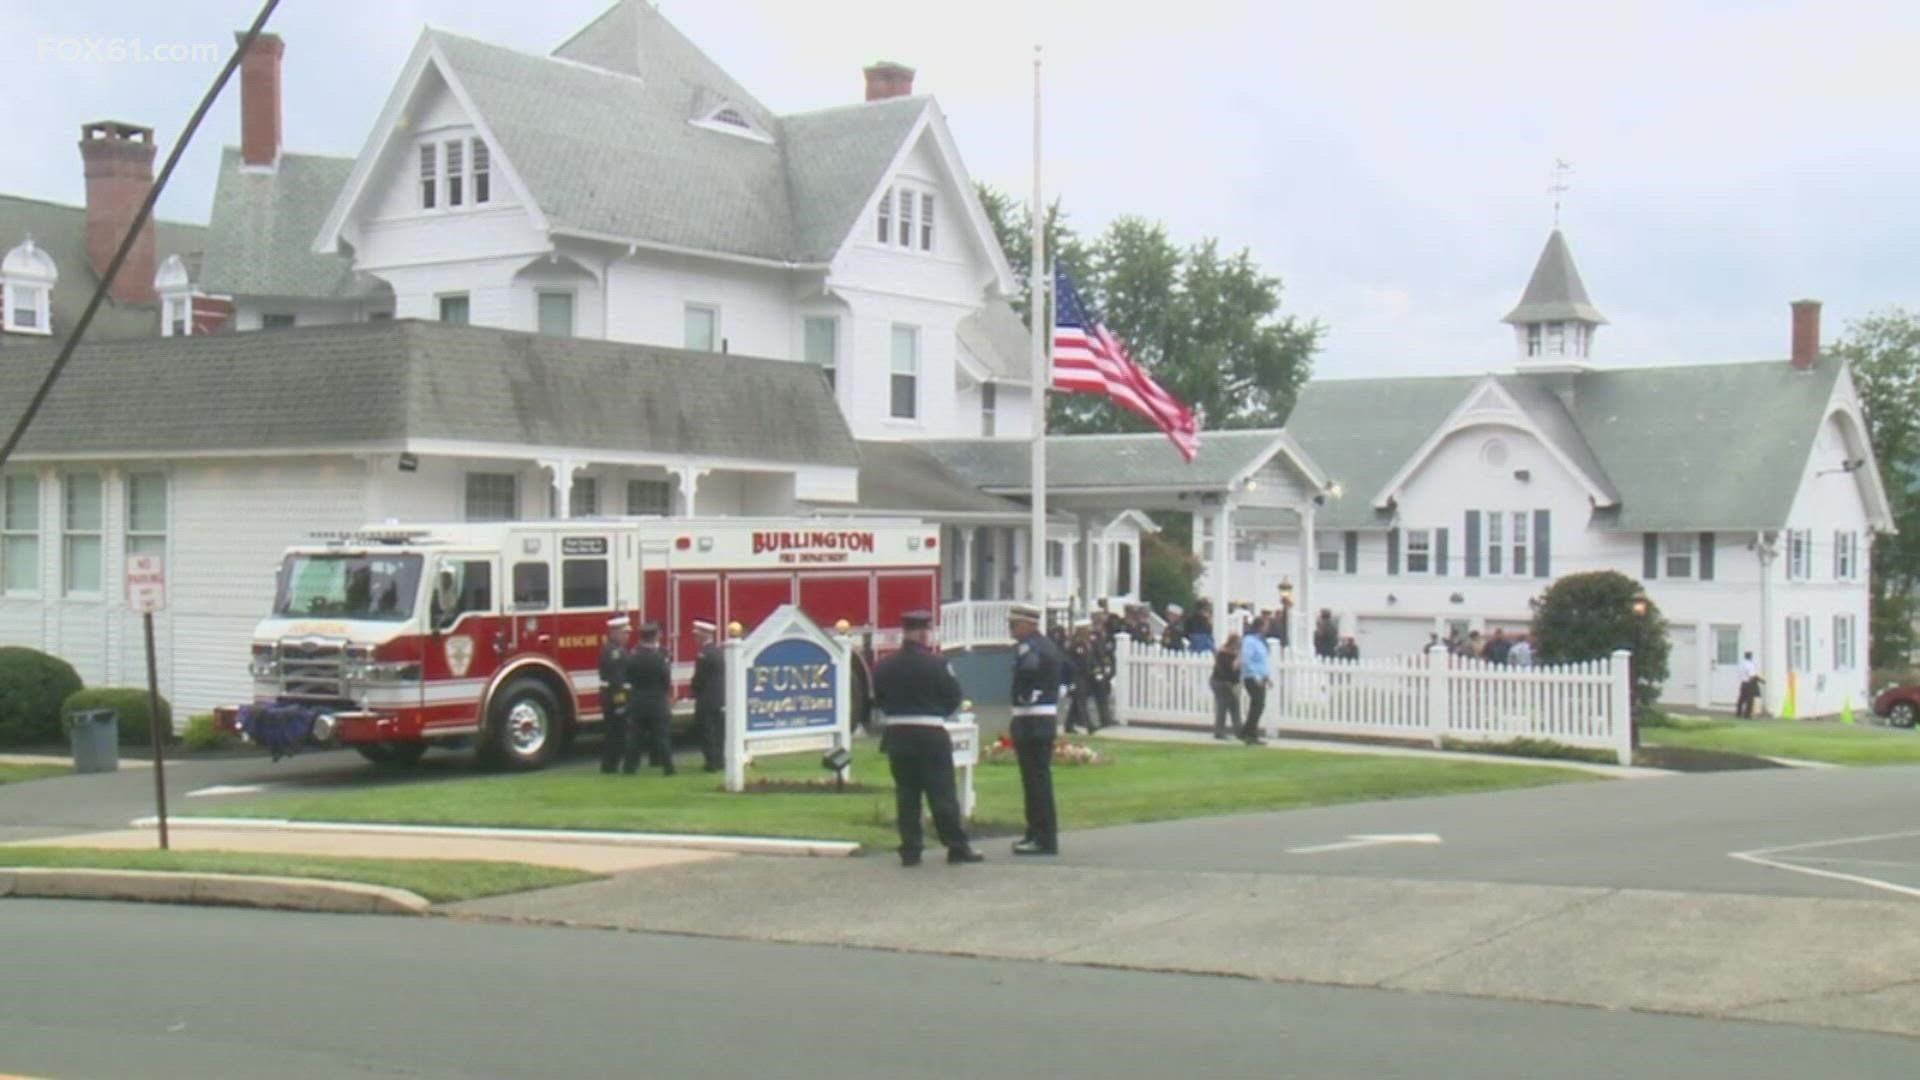 Calling hours for fallen firefighter Colin McFadden, who was taken to the hospital during a fire call in New Hartford.